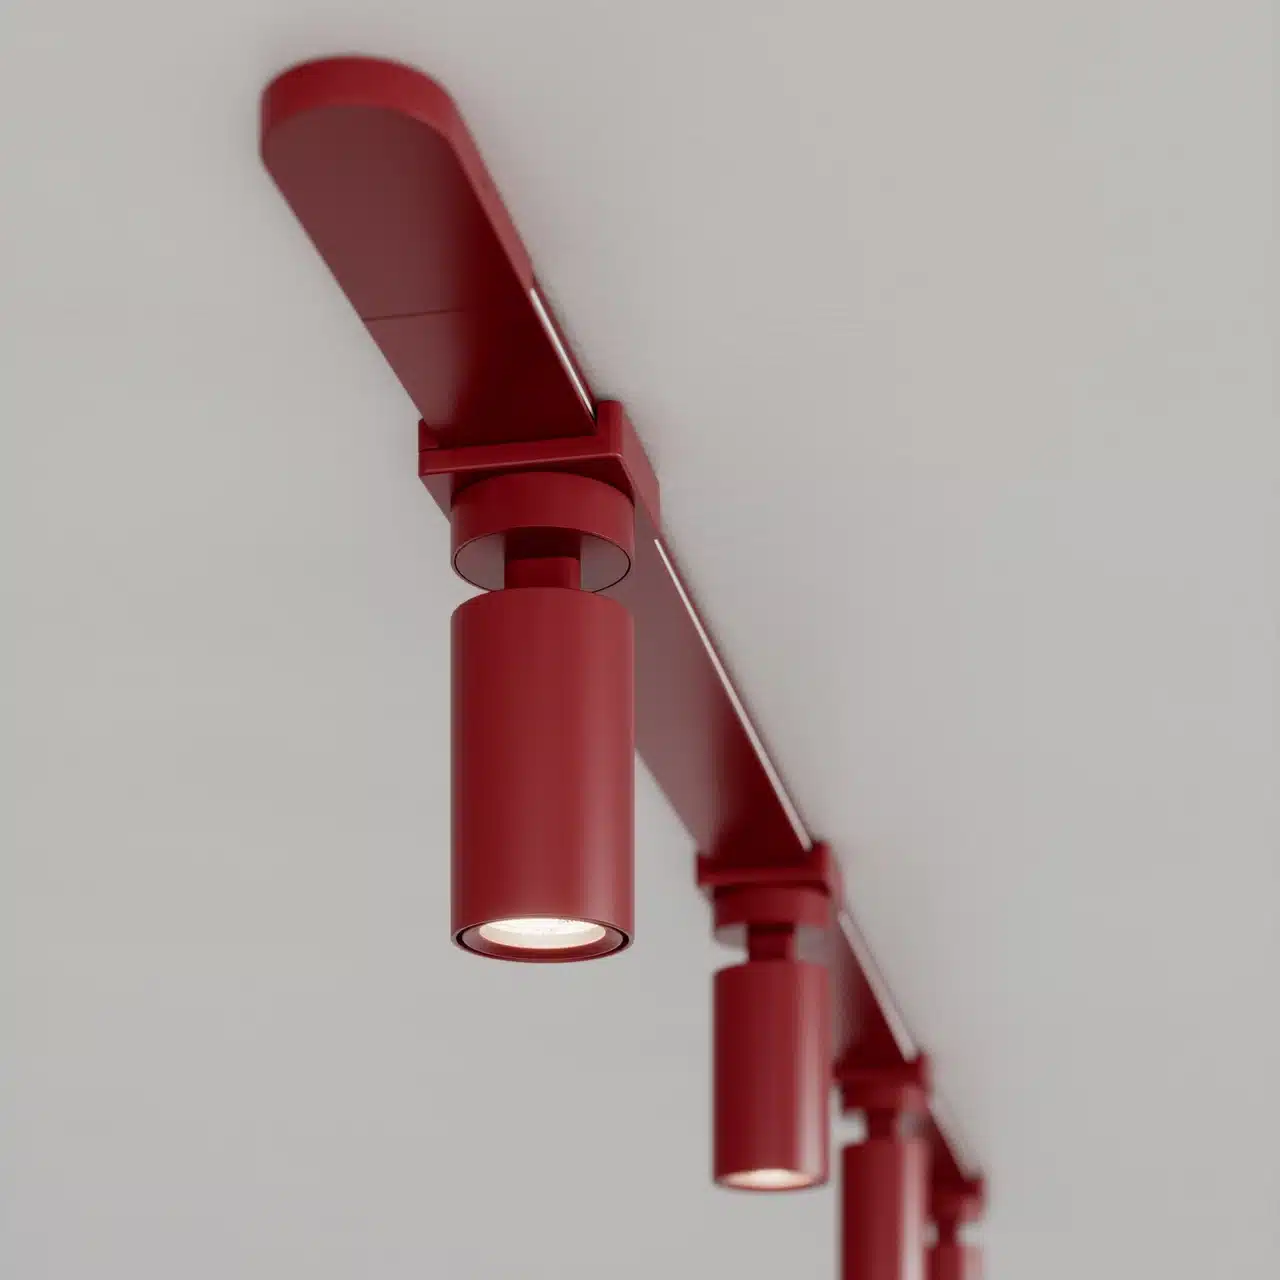 Red track lighting fixtures on white ceiling